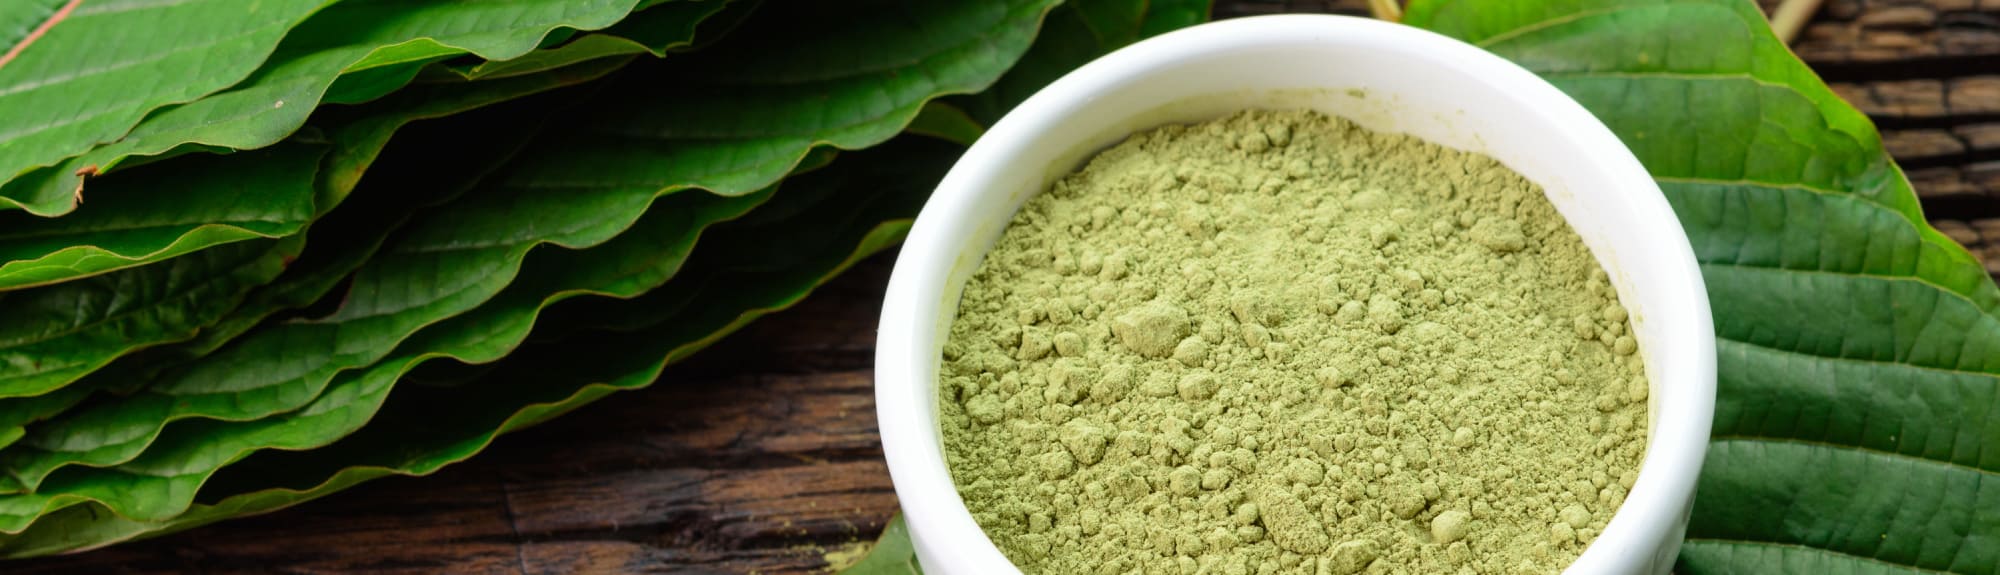 Red Medan Kratom Review: Exploring the Relaxing Benefits and Effects of this Calming Strain